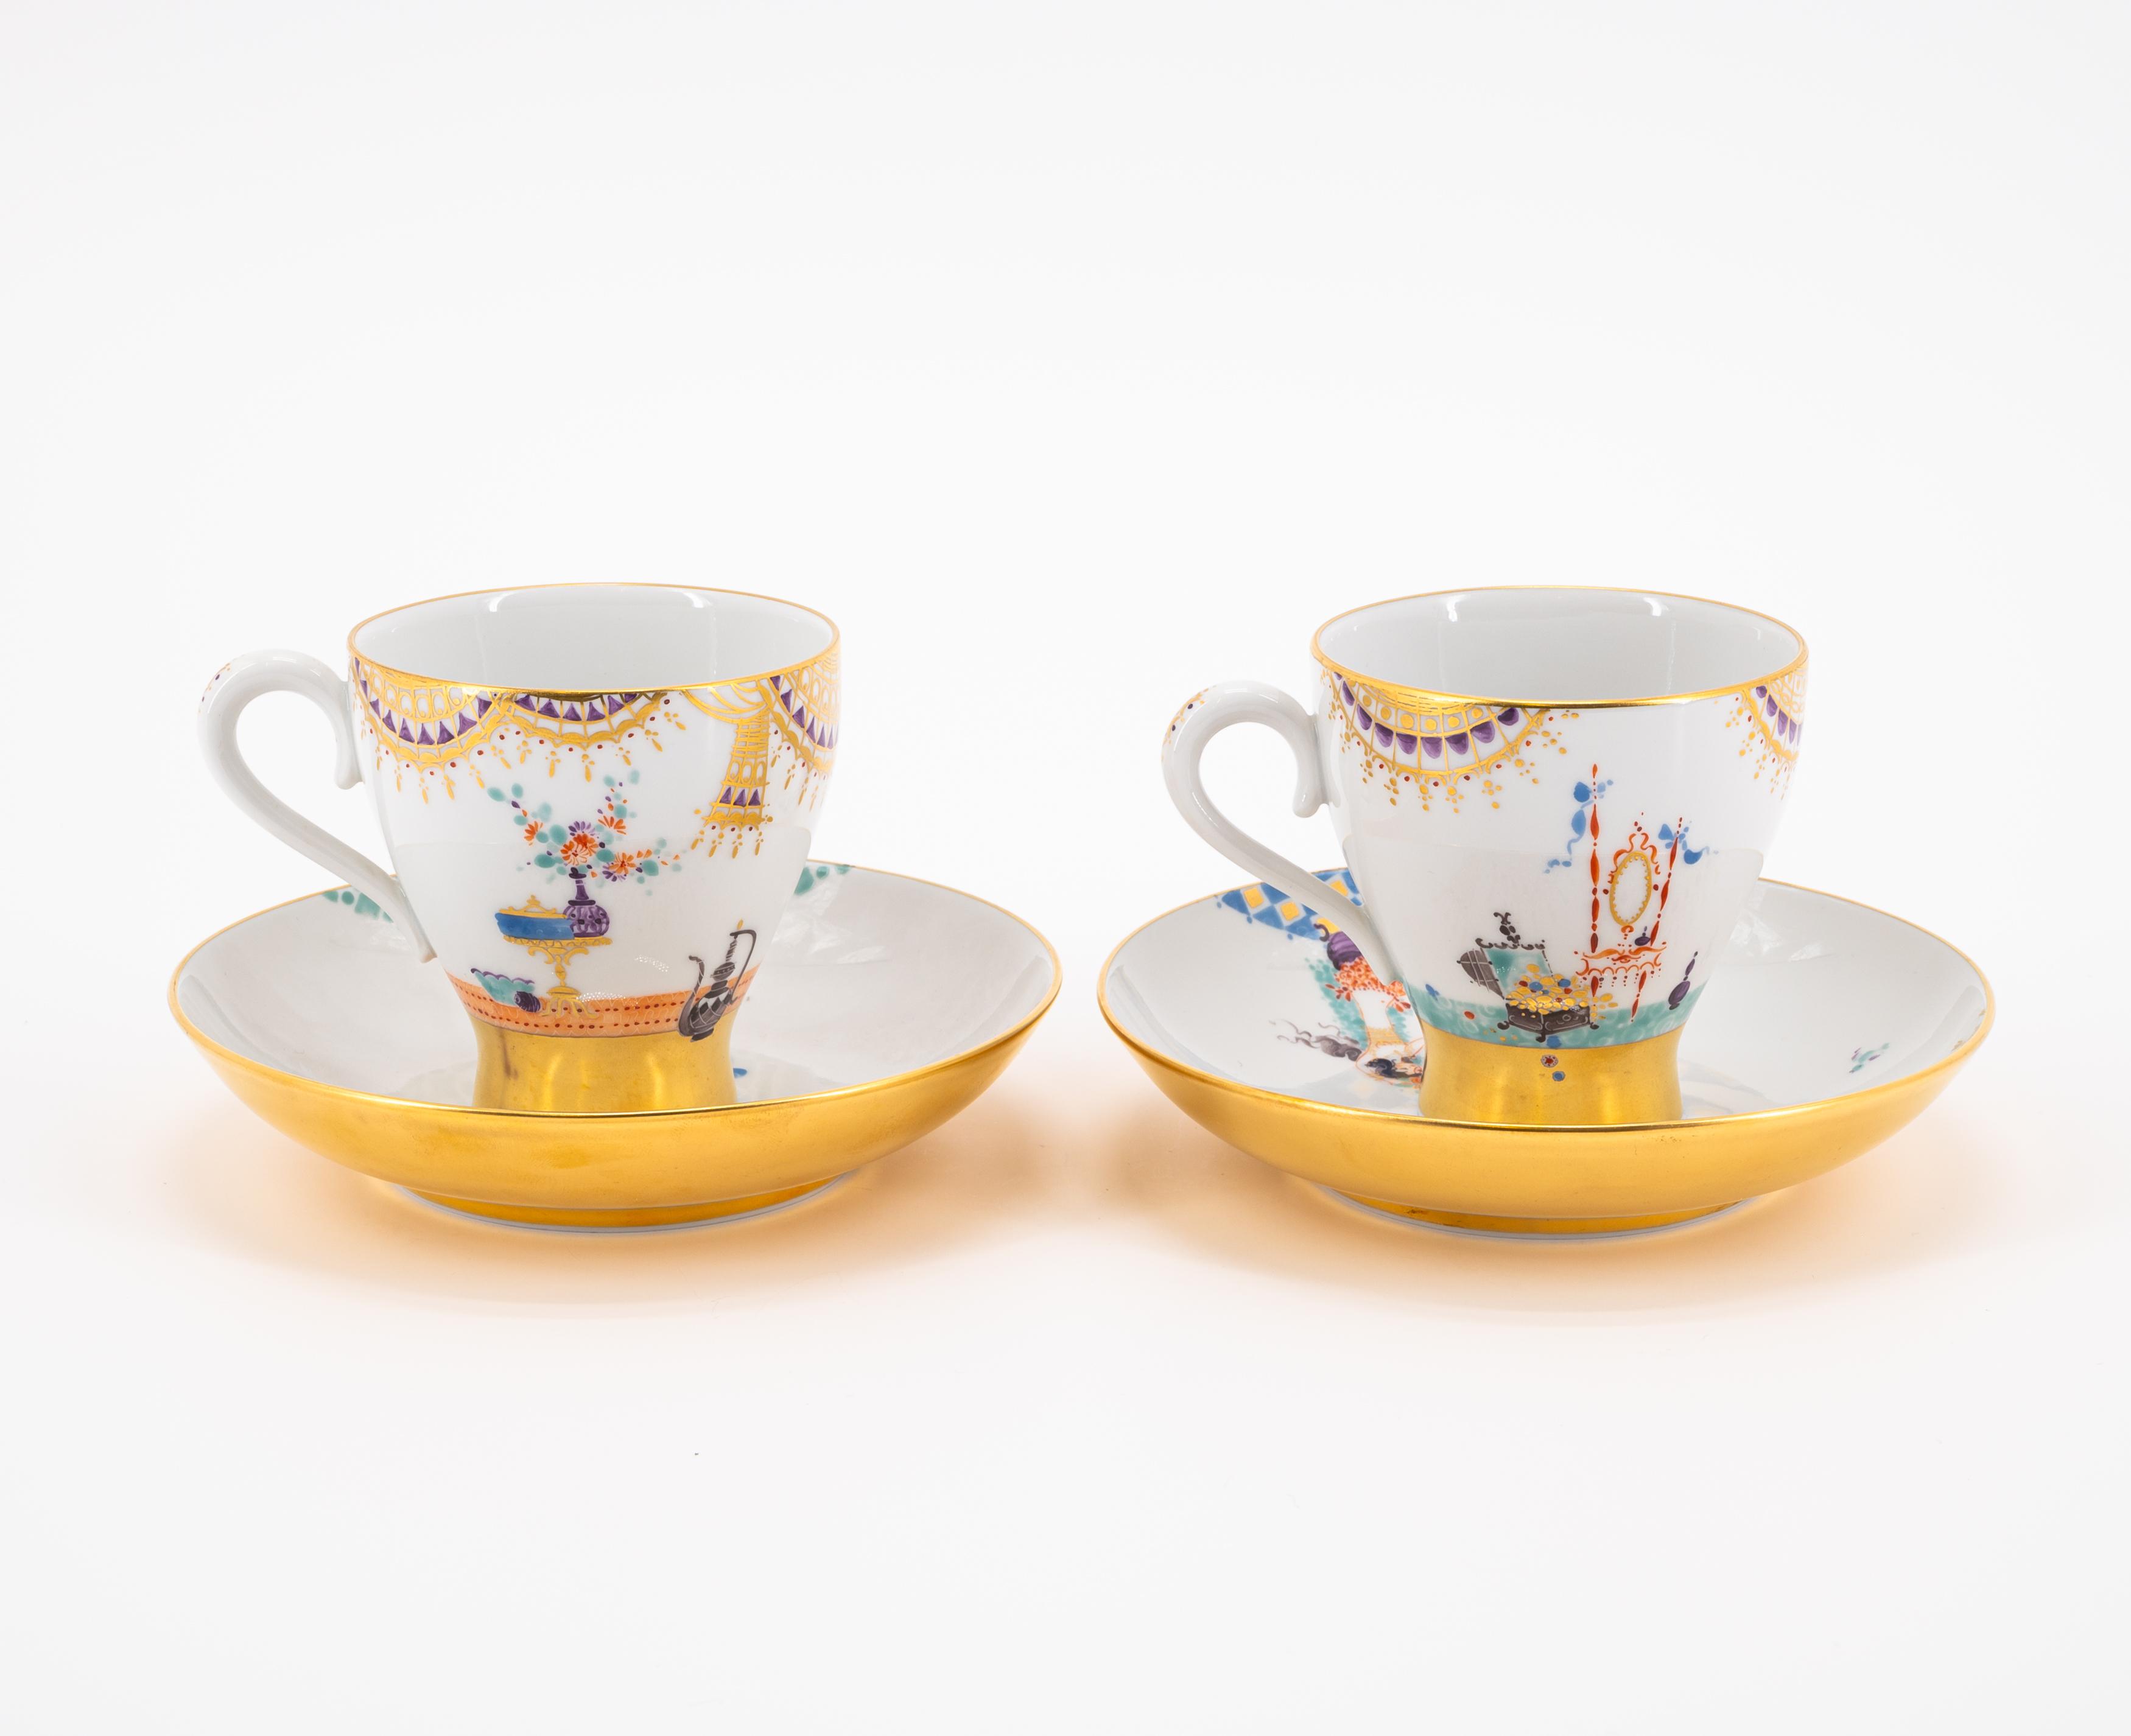 PORCELAIN COFFEE SERVICE '1001 NIGHTS' FOR SIX PEOPLE - Image 5 of 15